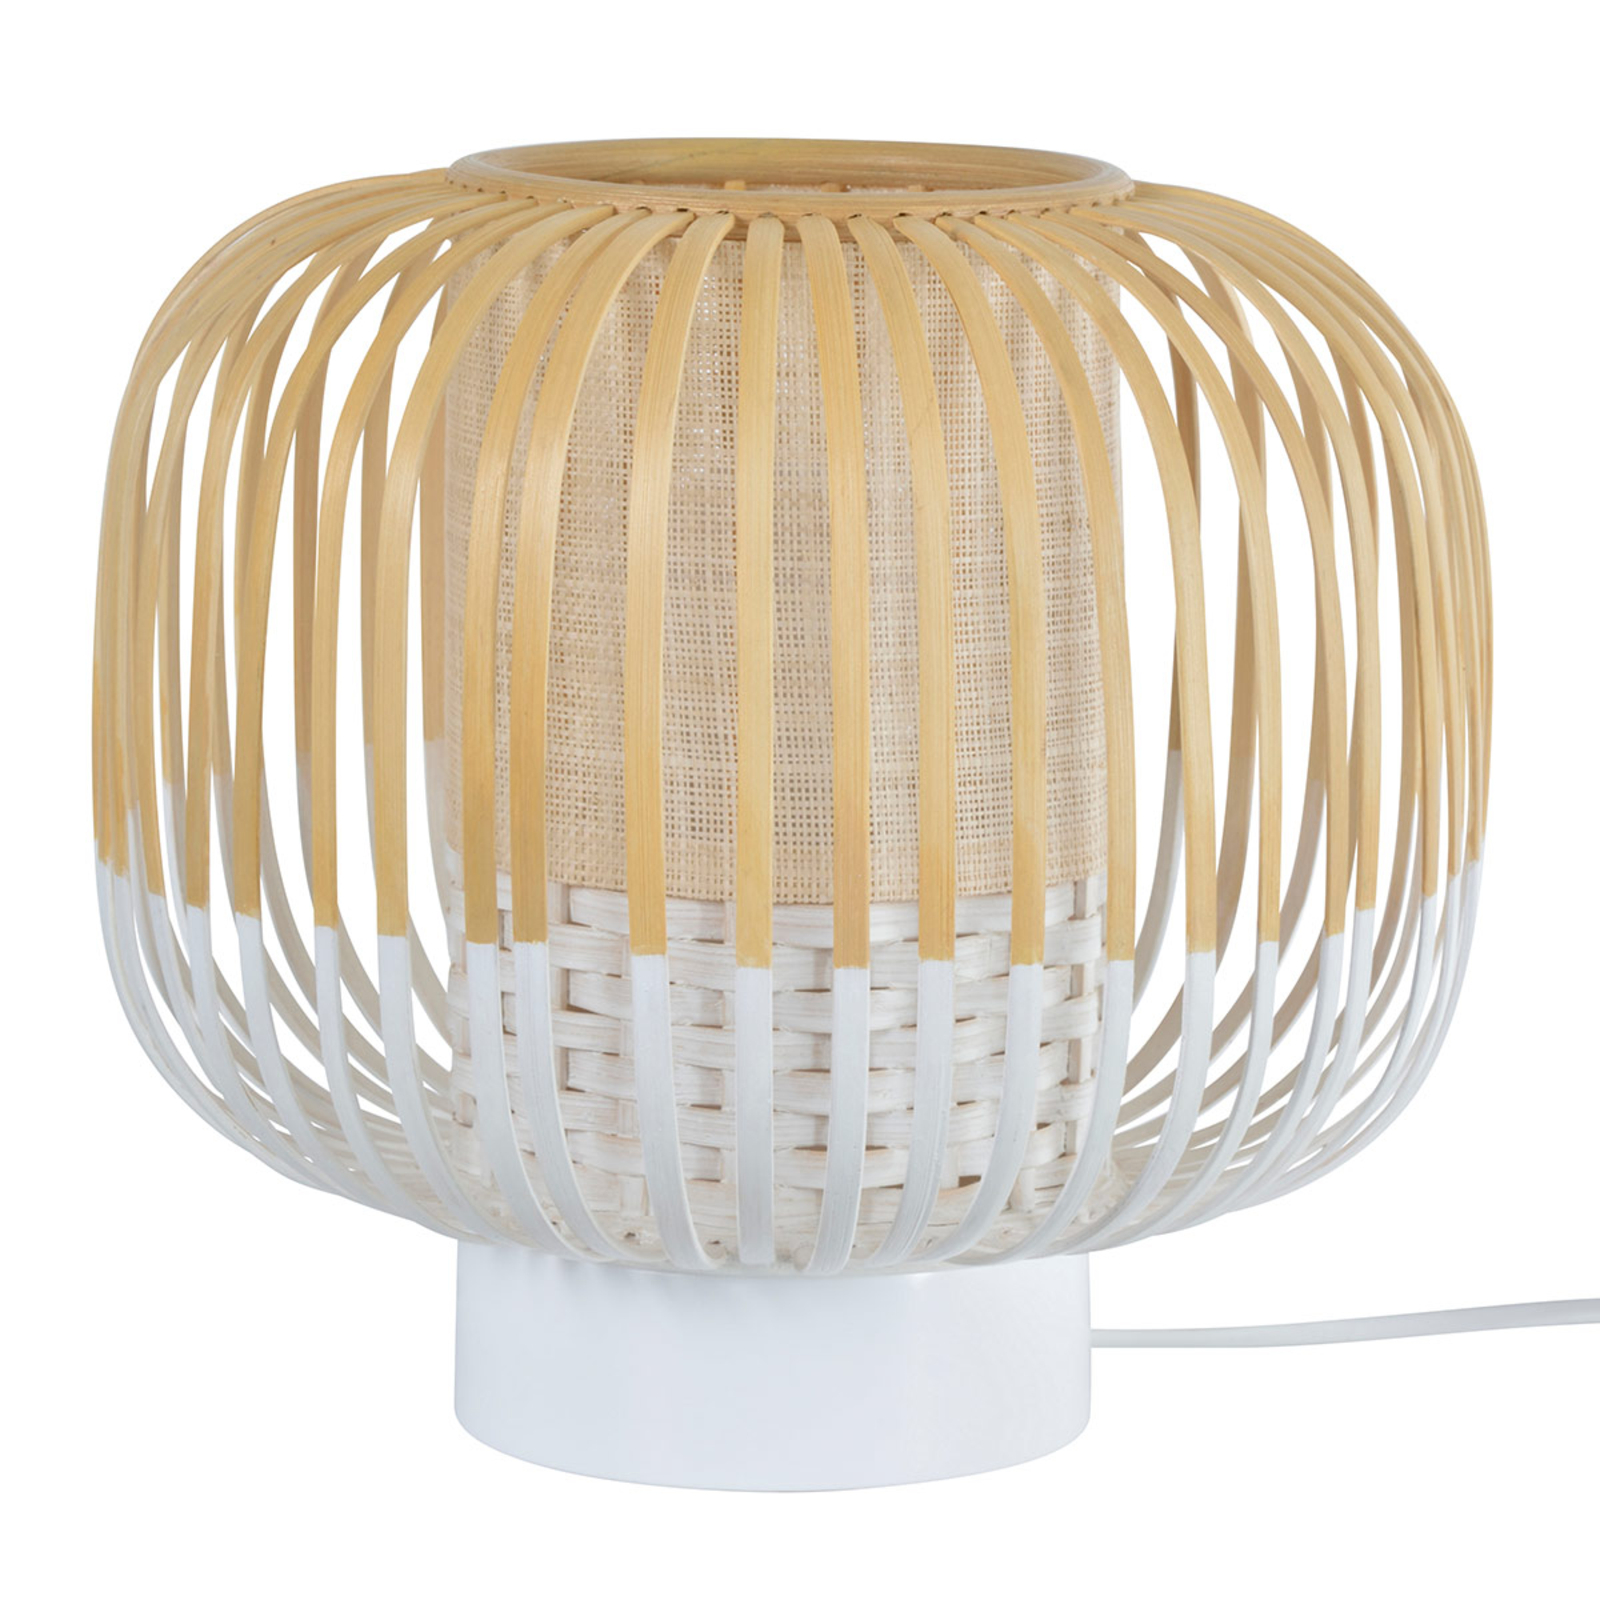 Forestier Bamboo Light Table Lamp, Bamboo Vessel Table Lamp Uk